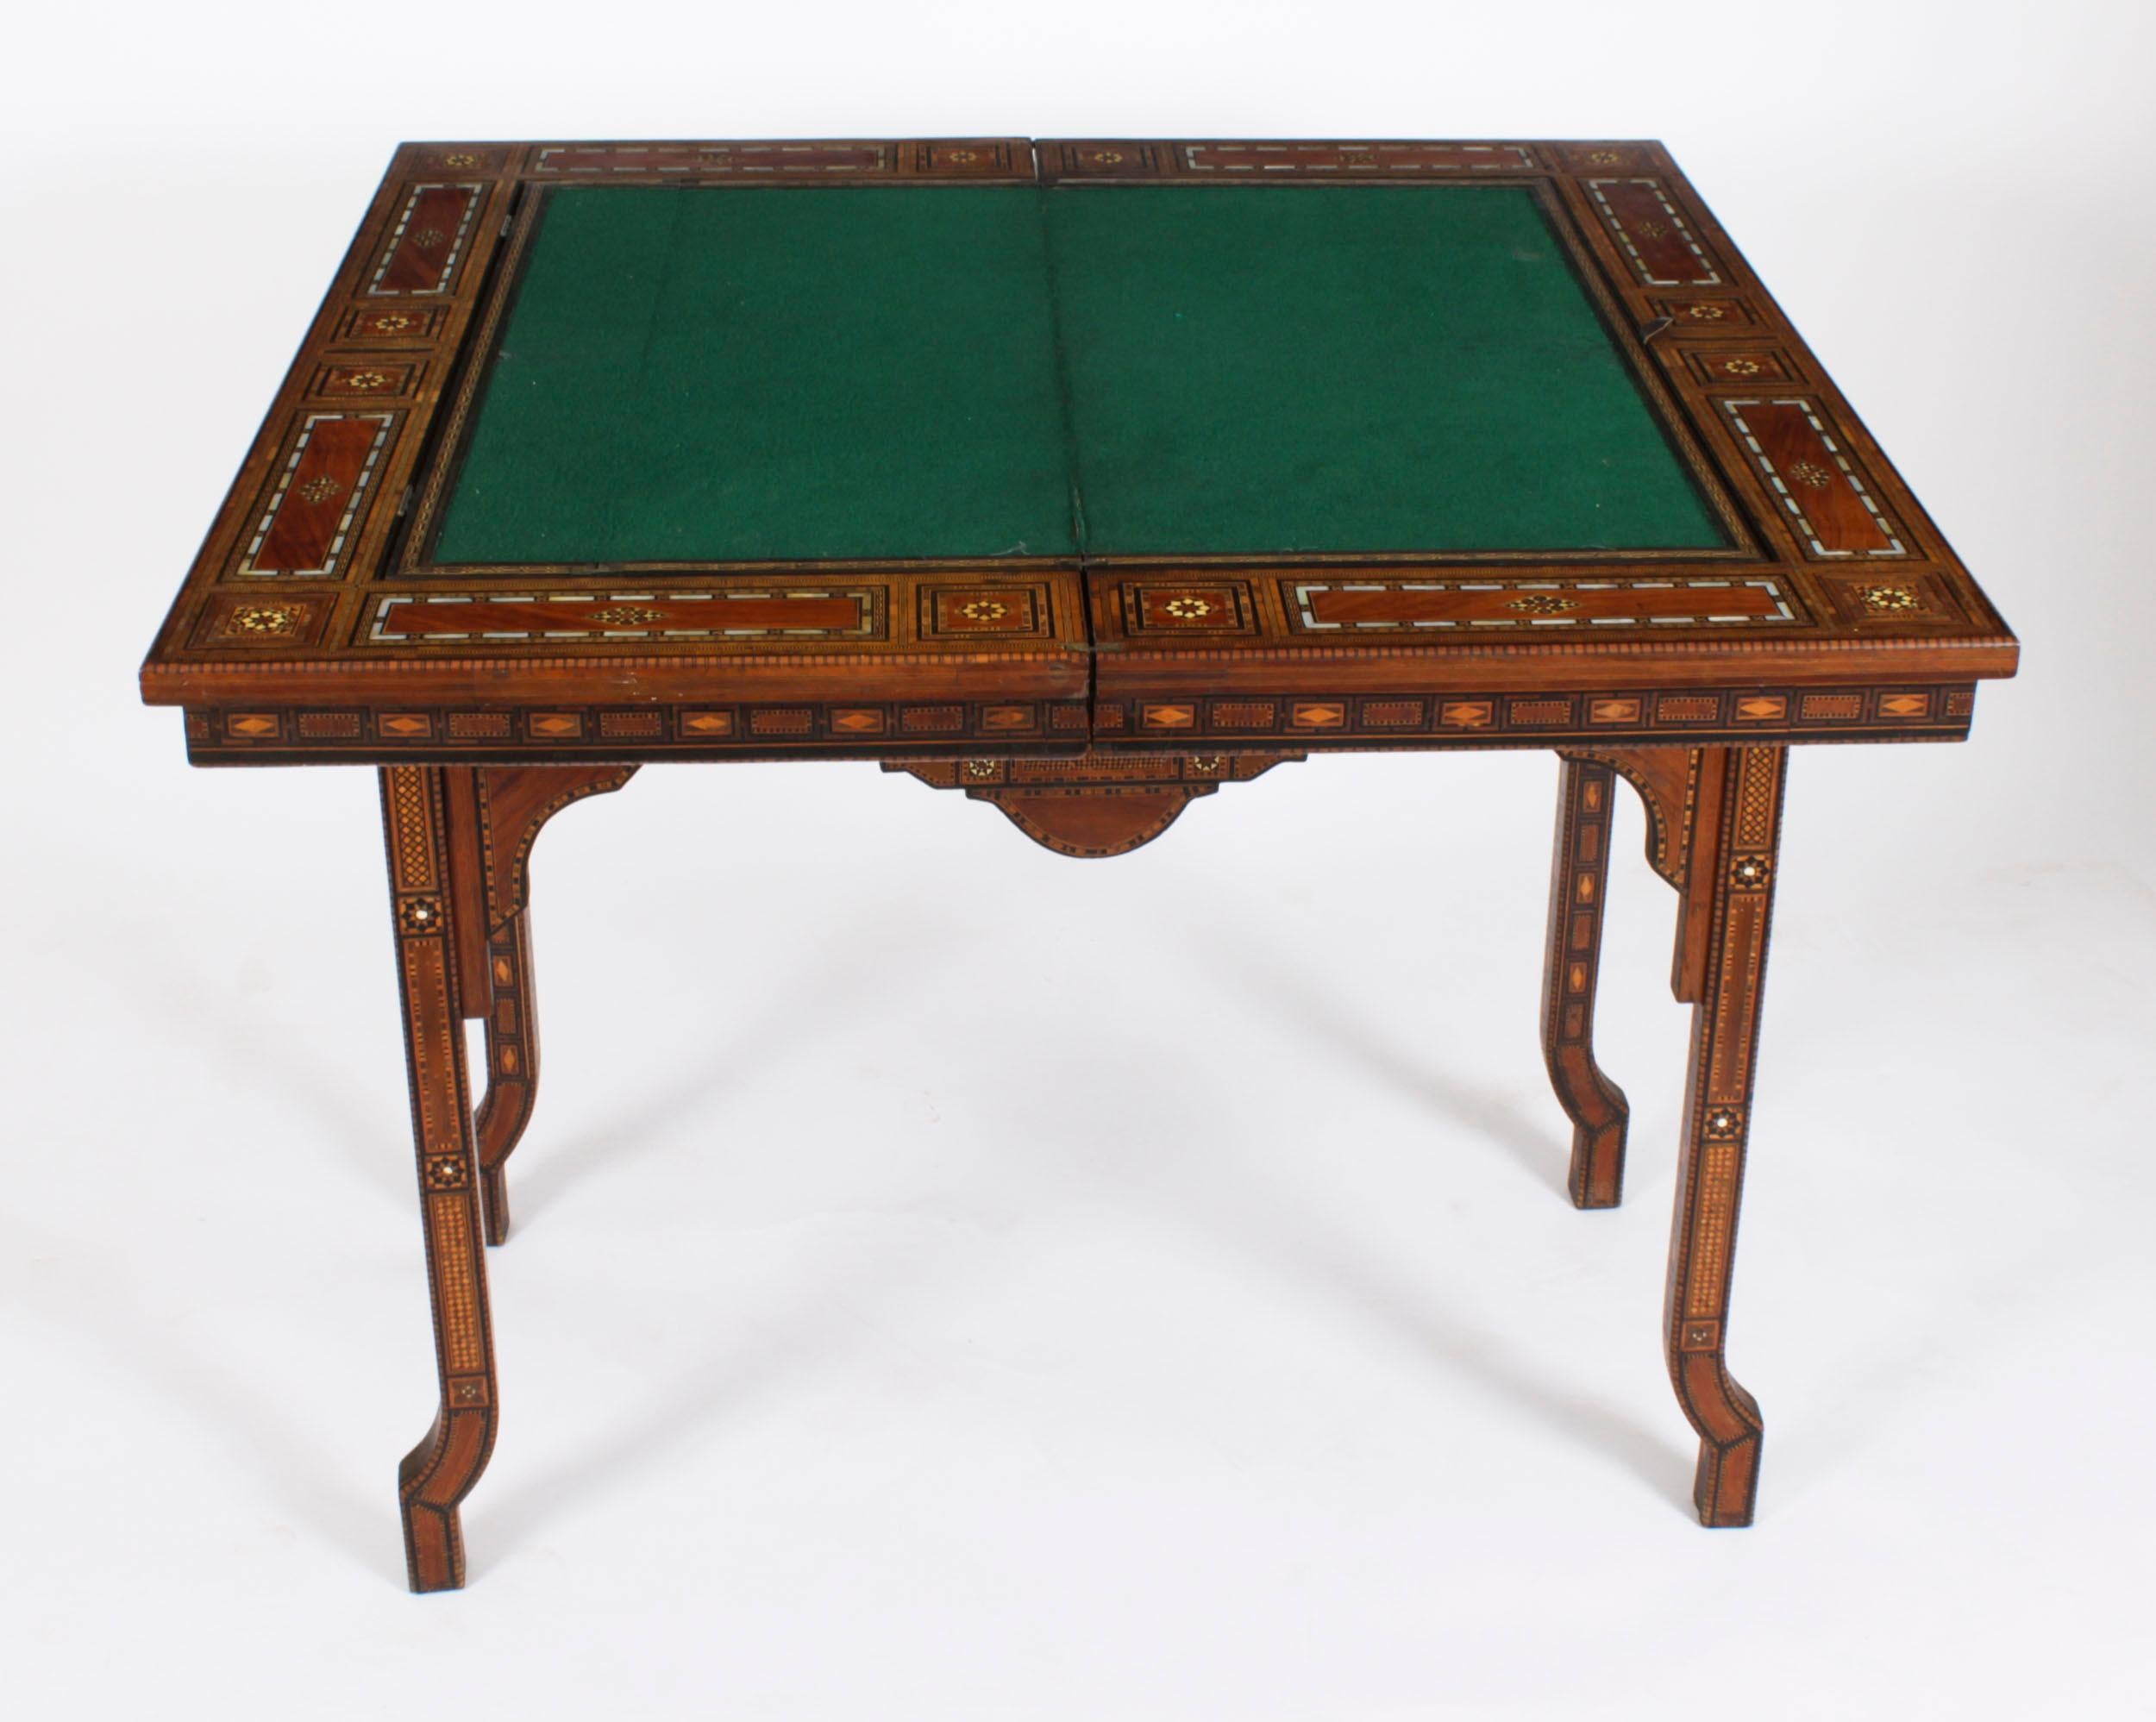 Antique Damascus Syrian Inlaid Card, Chess, Backgammon, Games table C1900 For Sale 6